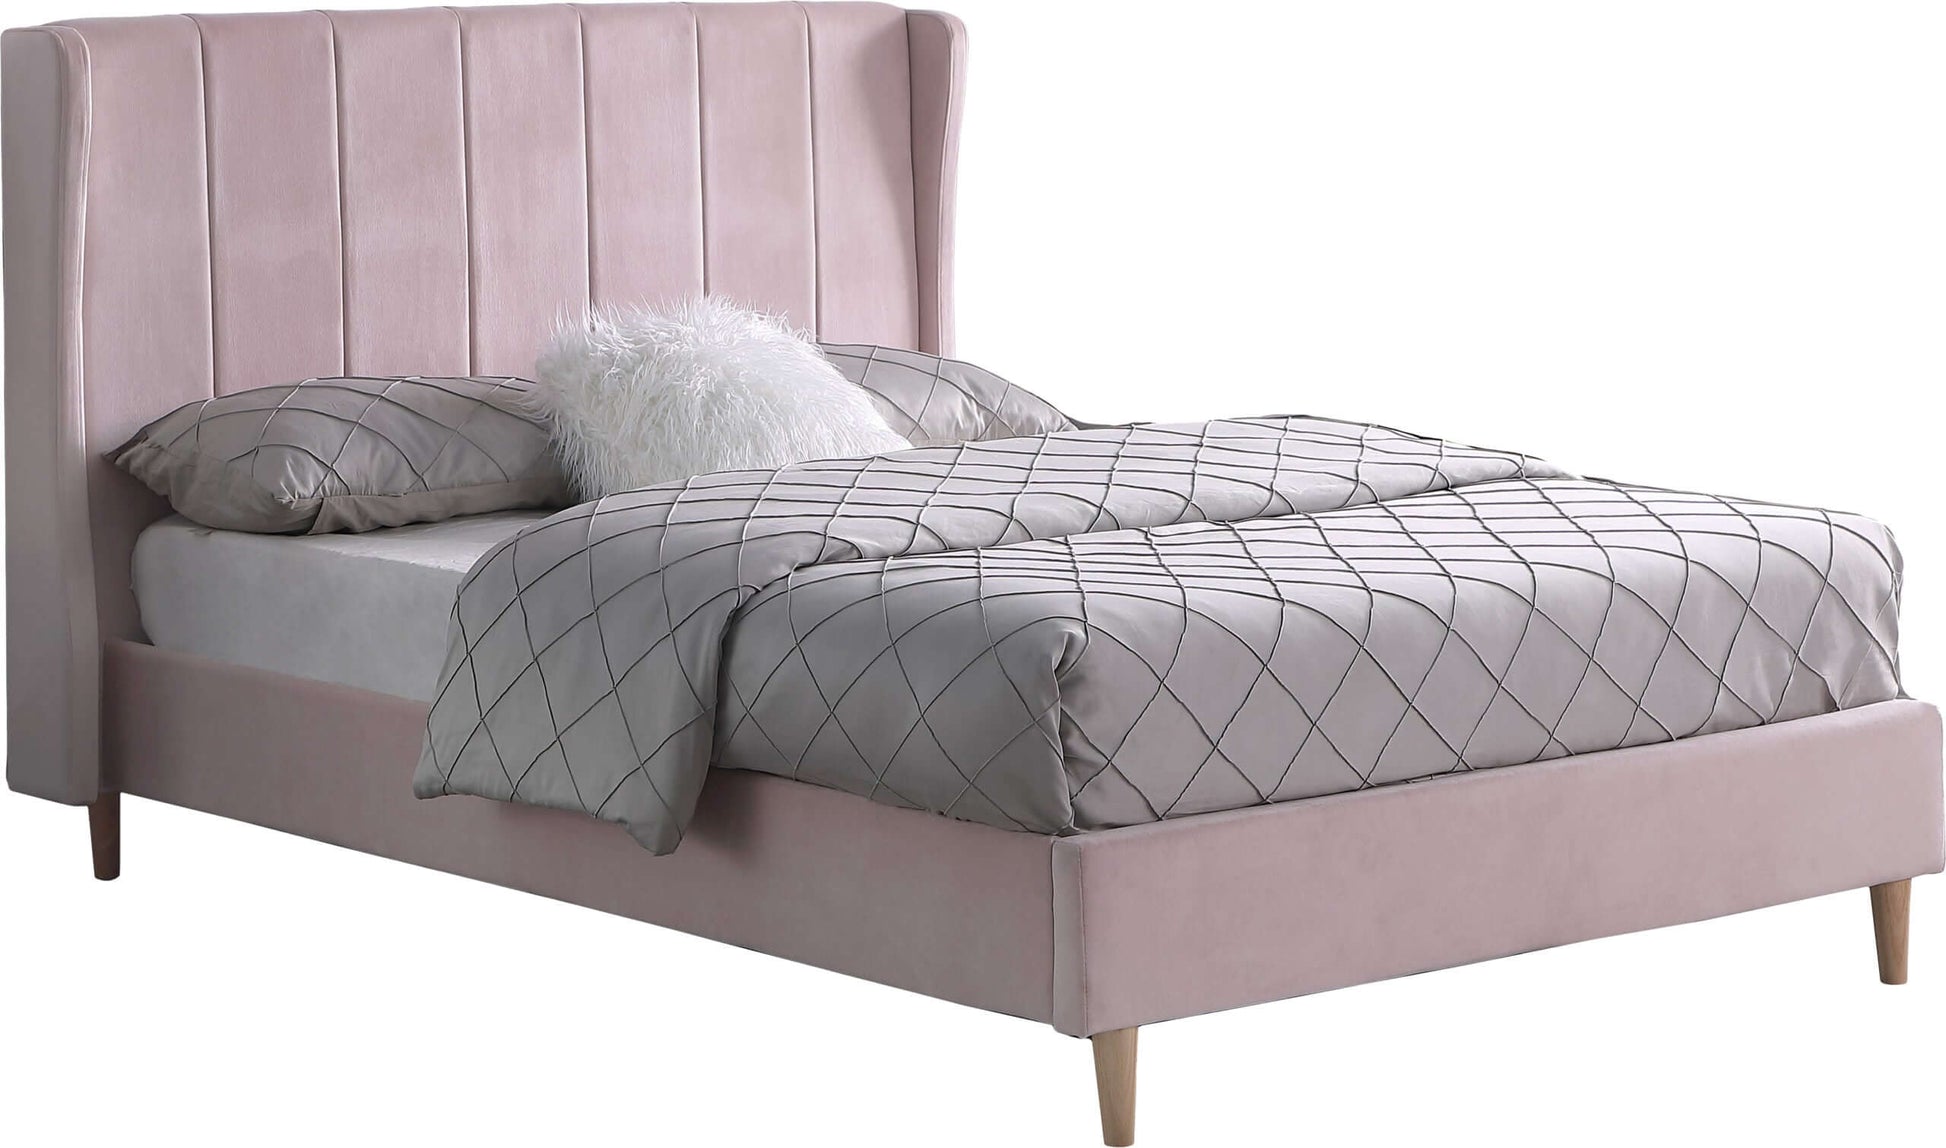 Amelia 5' King Bed Pink Velvet Fabric- The Right Buy Store